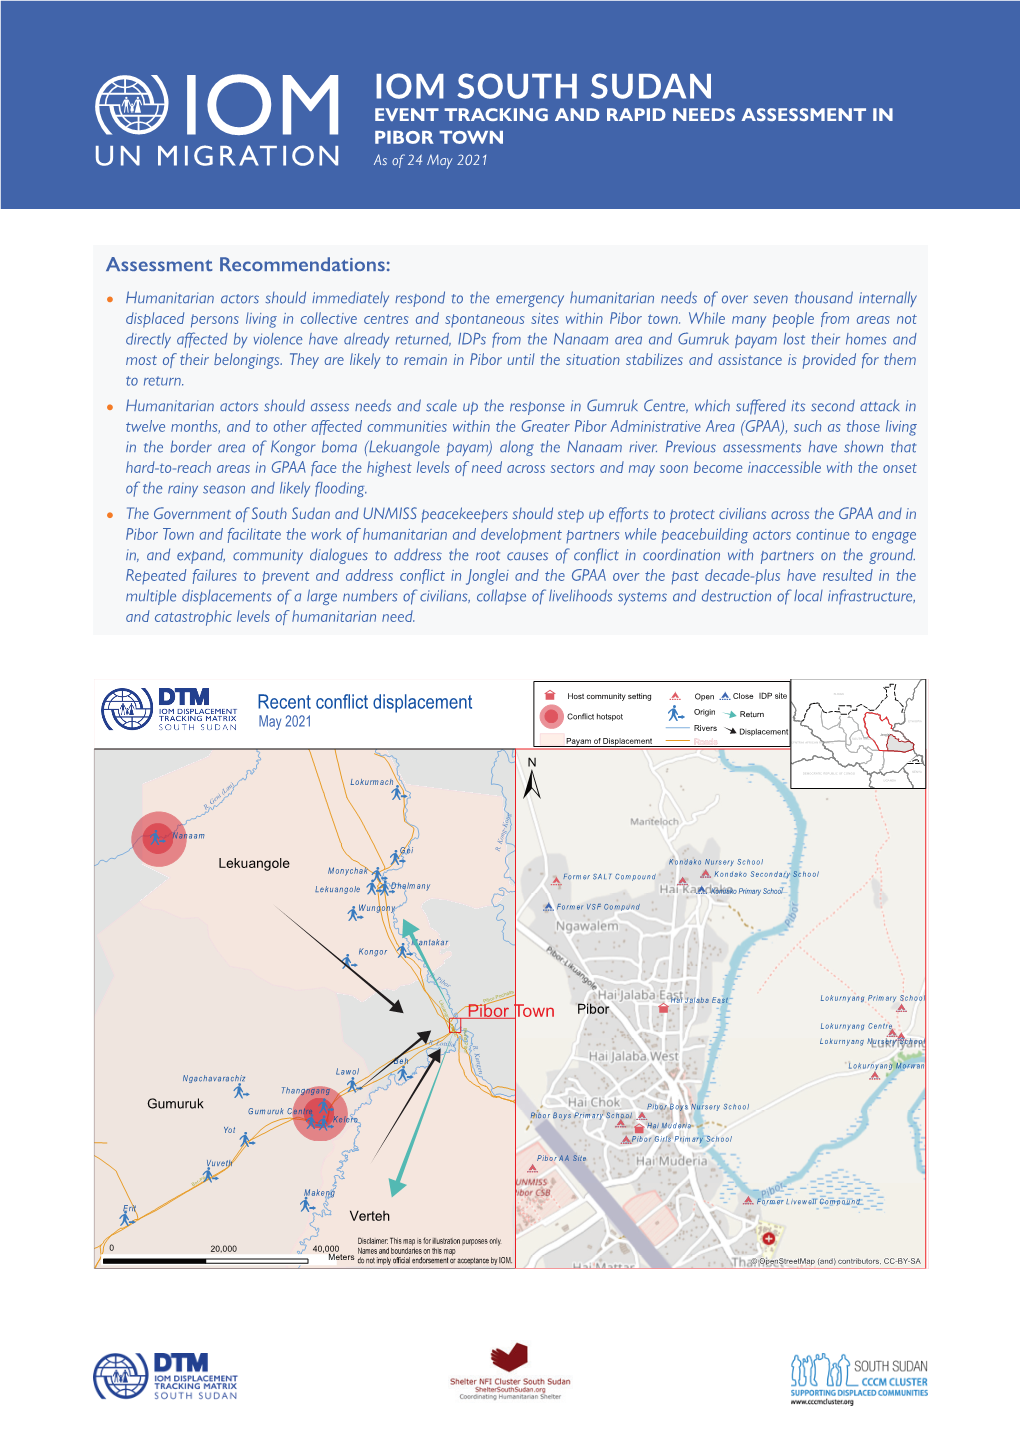 IOM SOUTH SUDAN EVENT TRACKING and RAPID NEEDS ASSESSMENT in PIBOR TOWN As of 24 May 2021